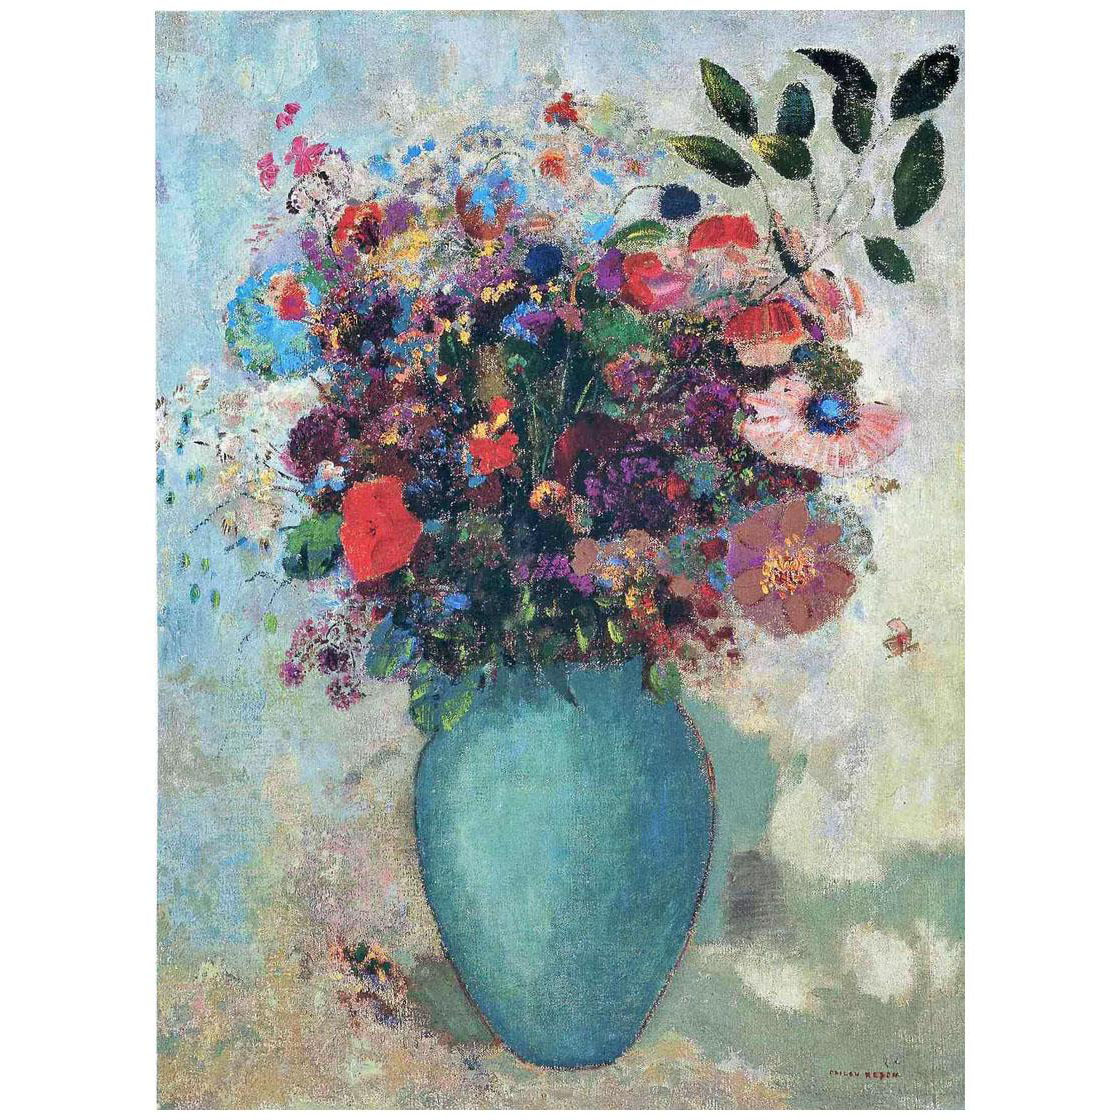 Odilon Redon. Flowers in a Turquoise Vase. 1912. Private collection